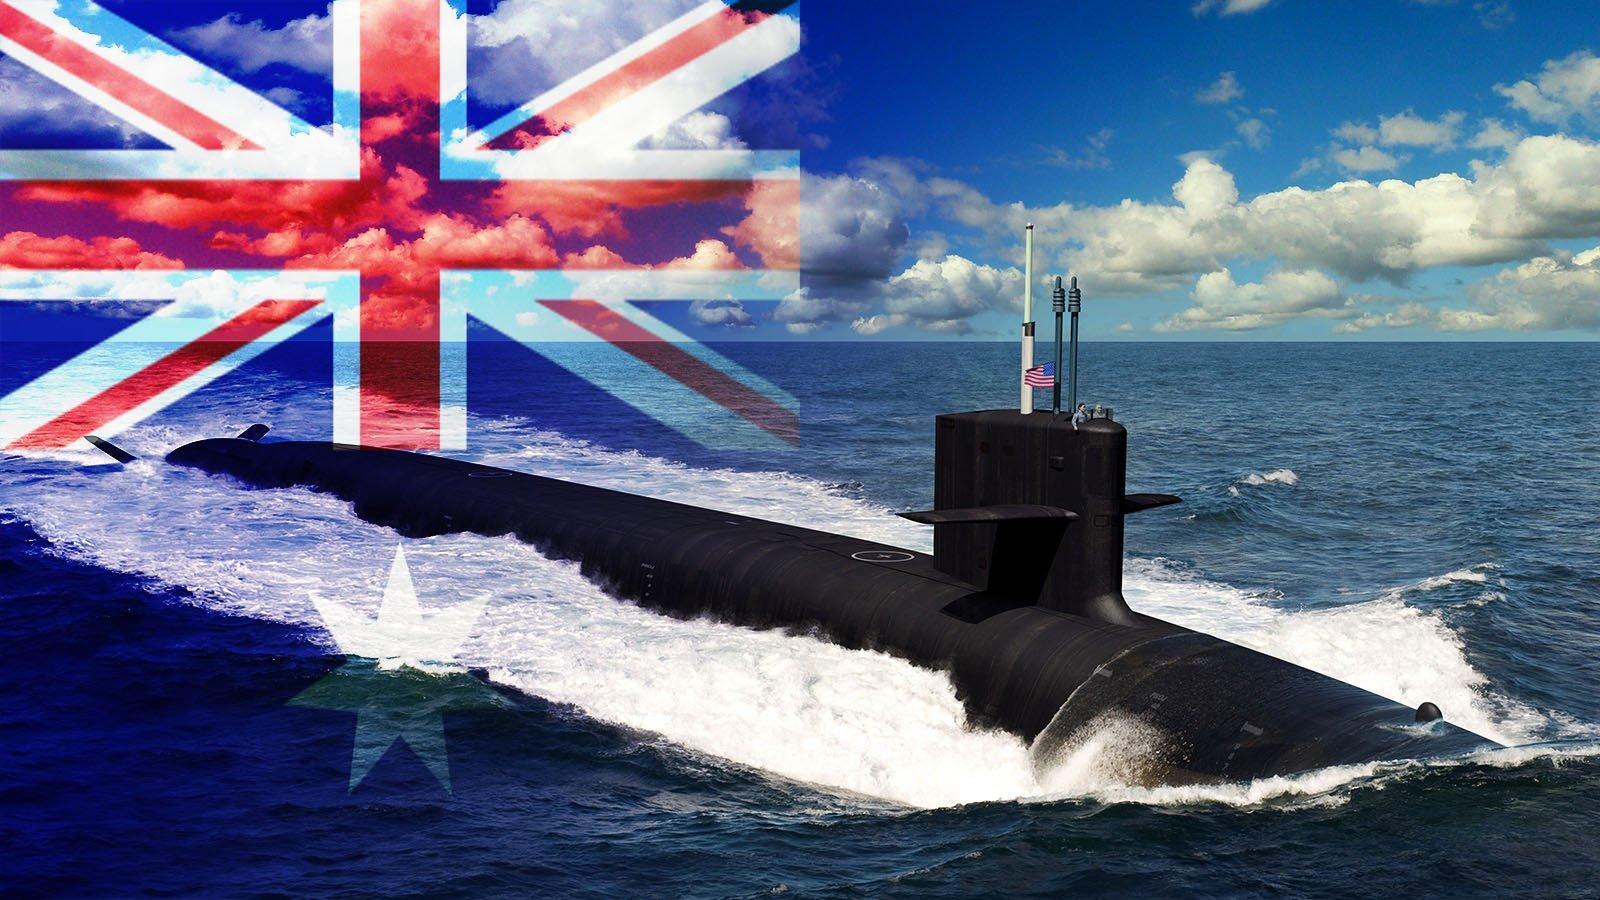 Australia is headed towards nuclear powered submarines for the first time, under a new agreement with the US and UK. (Graphic by Breaking Defense; original illustration by US Navy, via DVIDS)